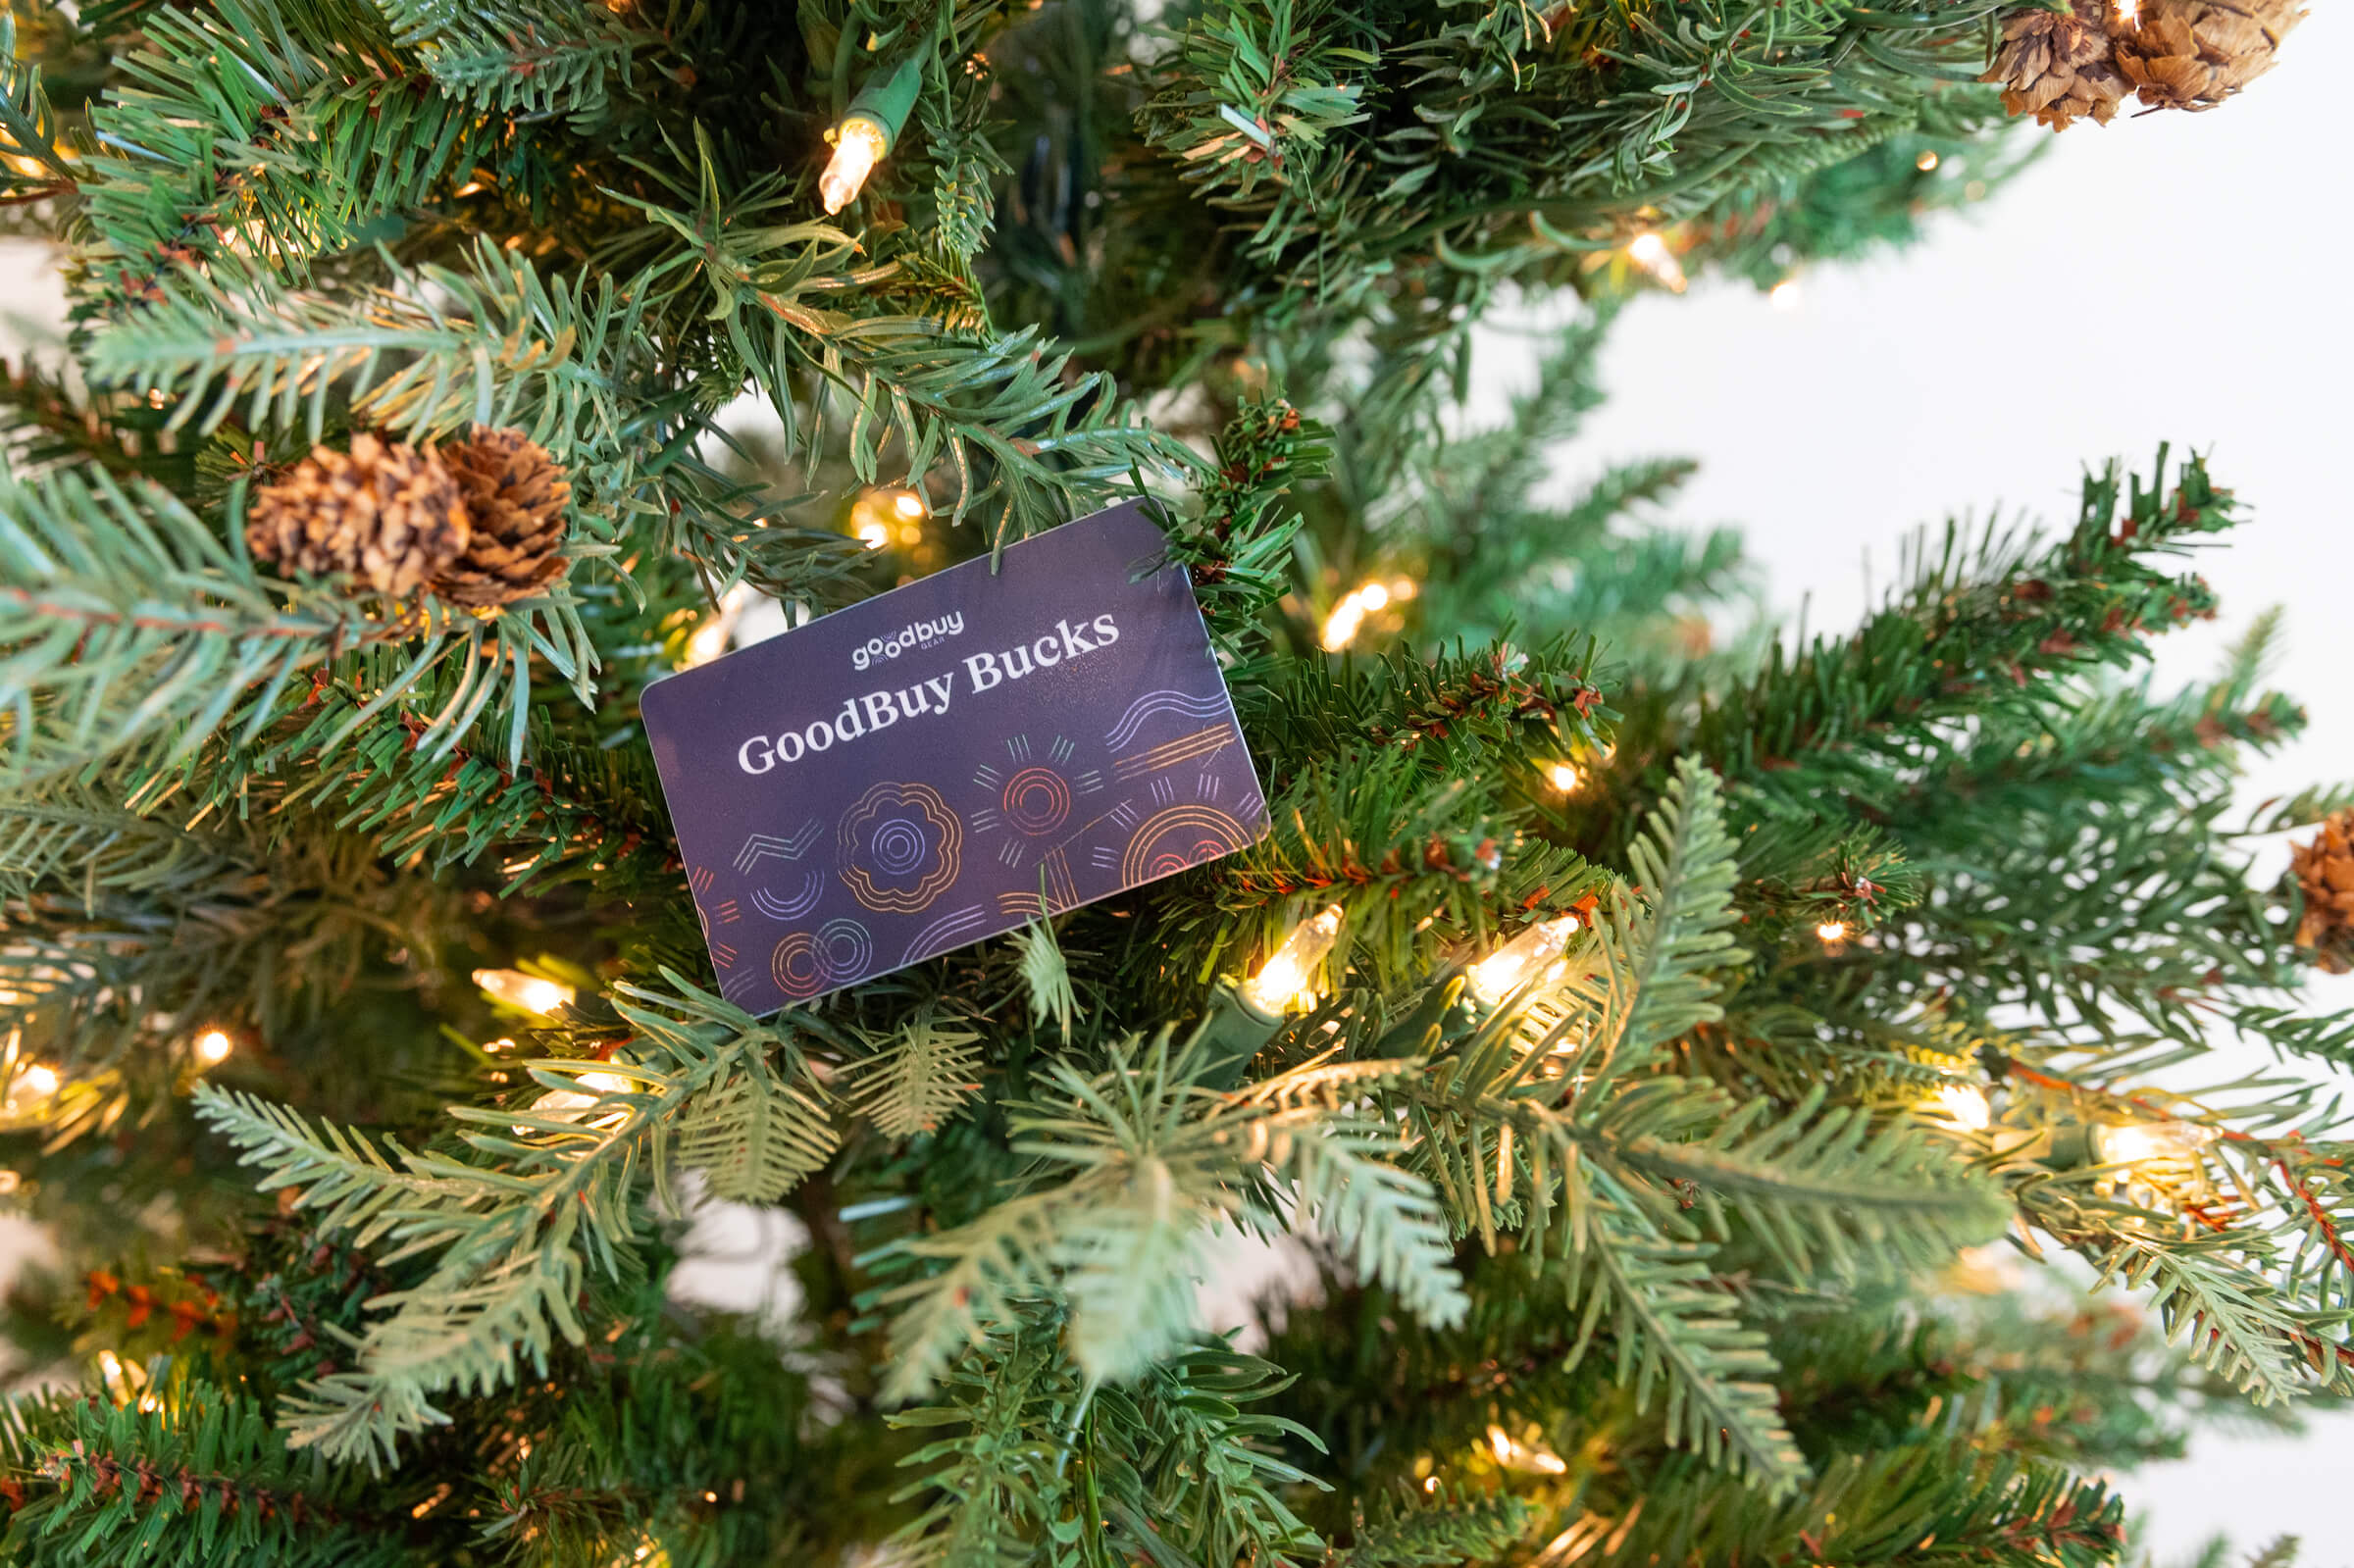 GoodBuy Gear Gift Card hanging from a Christmas tree